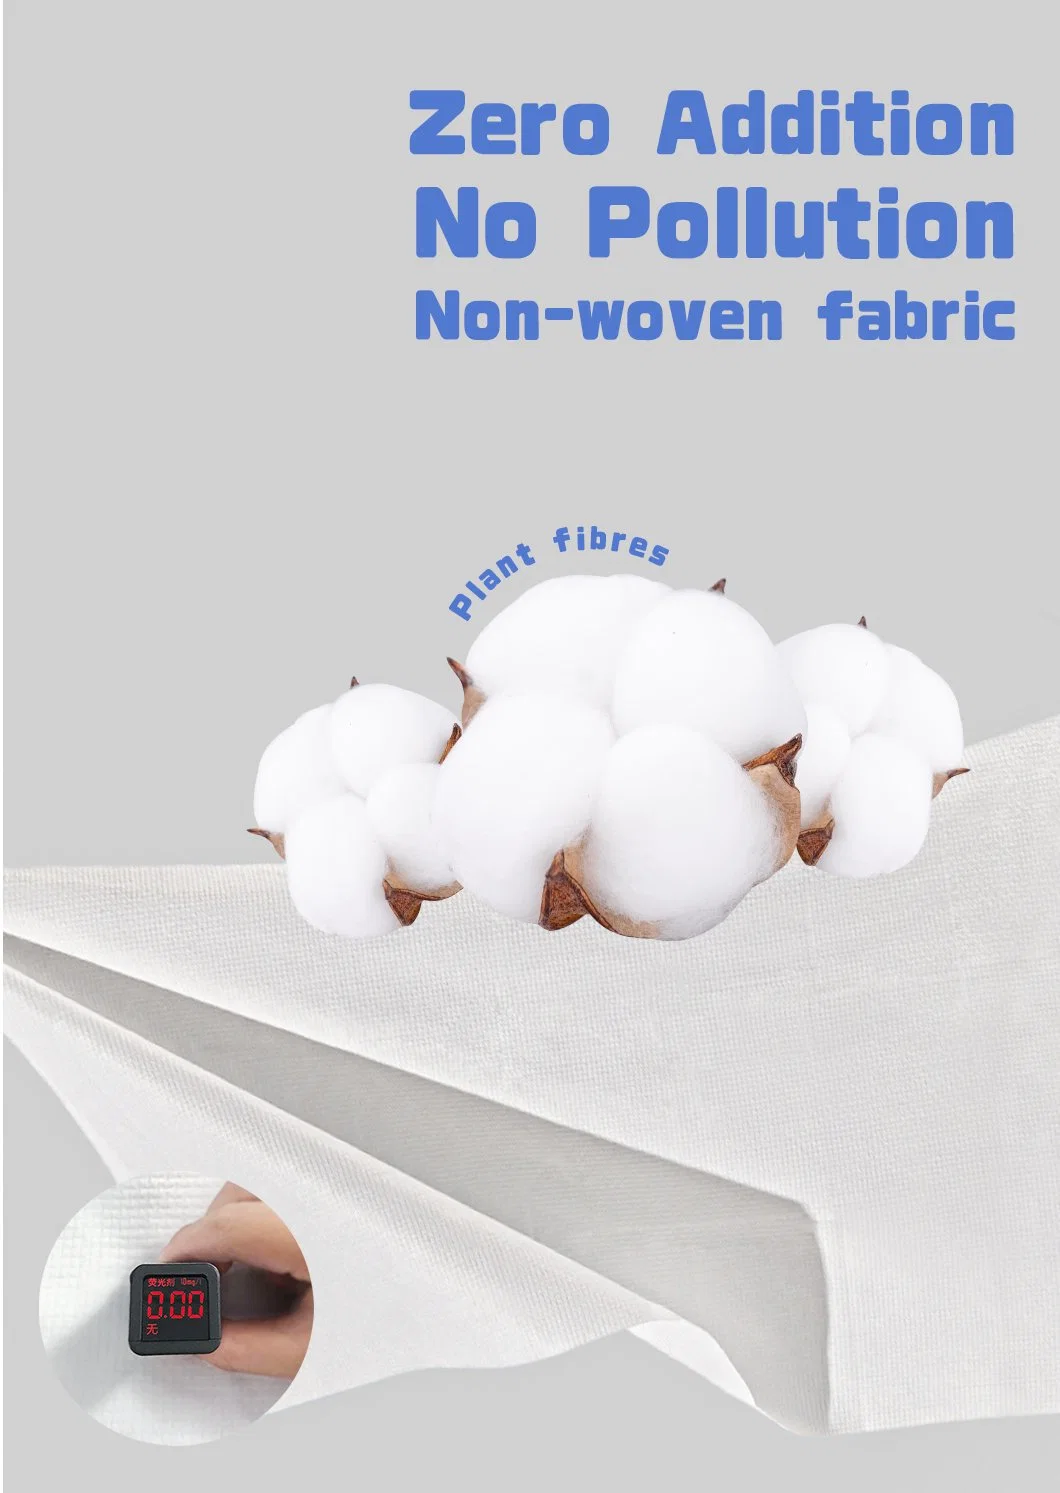 Non Woven Fabric Bath Cleaning Wipes for Pets Travle Pet Products